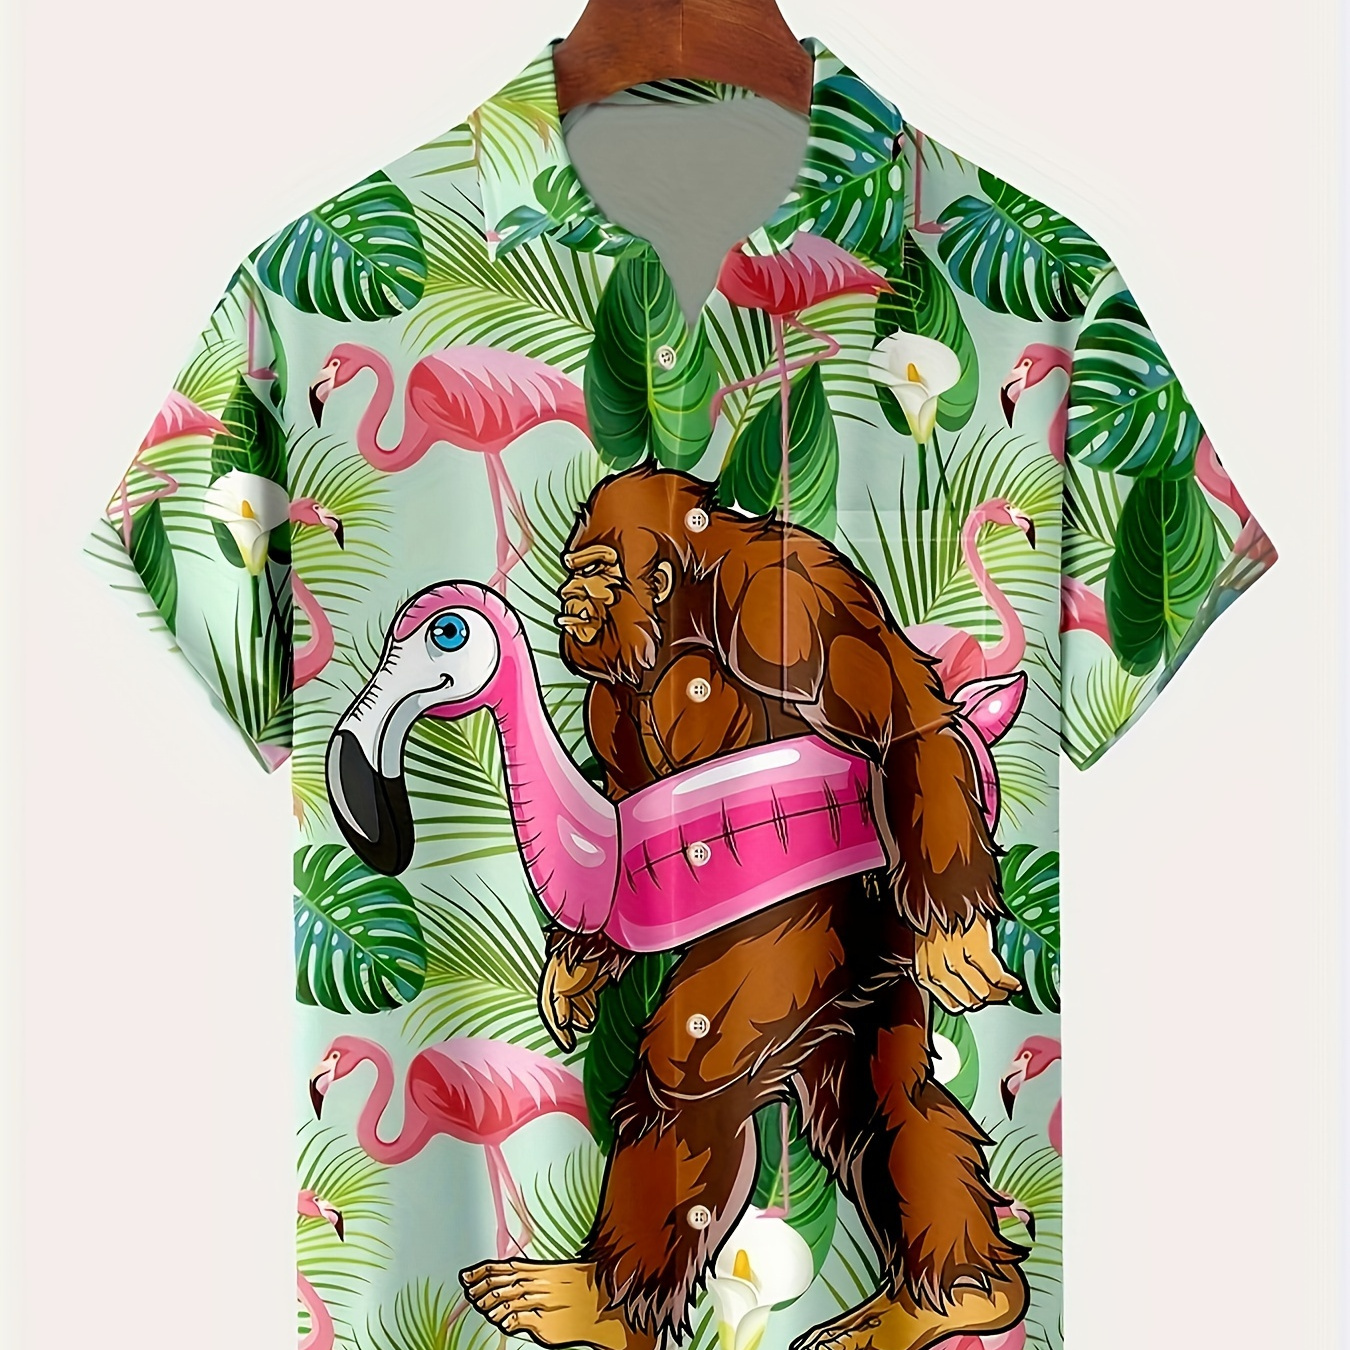 

Men's Trendy Hawaiian Lapel Collar Graphic Shirt With Stylish Flamingo & Gorilla Print For Summer Vacation And Casual Wear